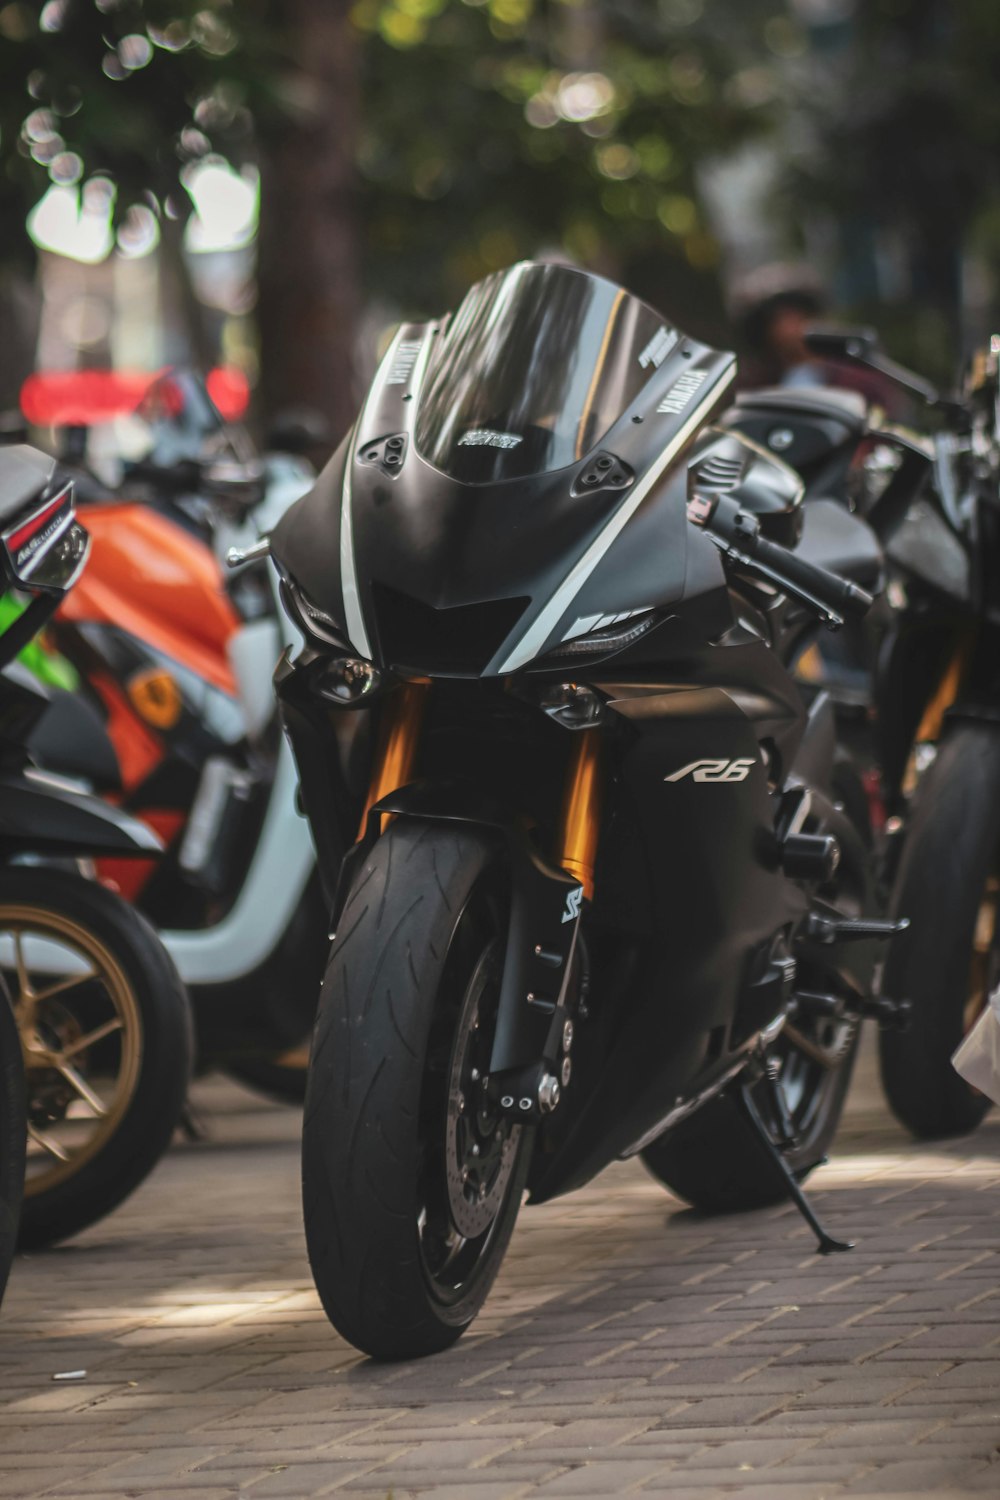 A group of motorcycles parked next to each other photo – Free